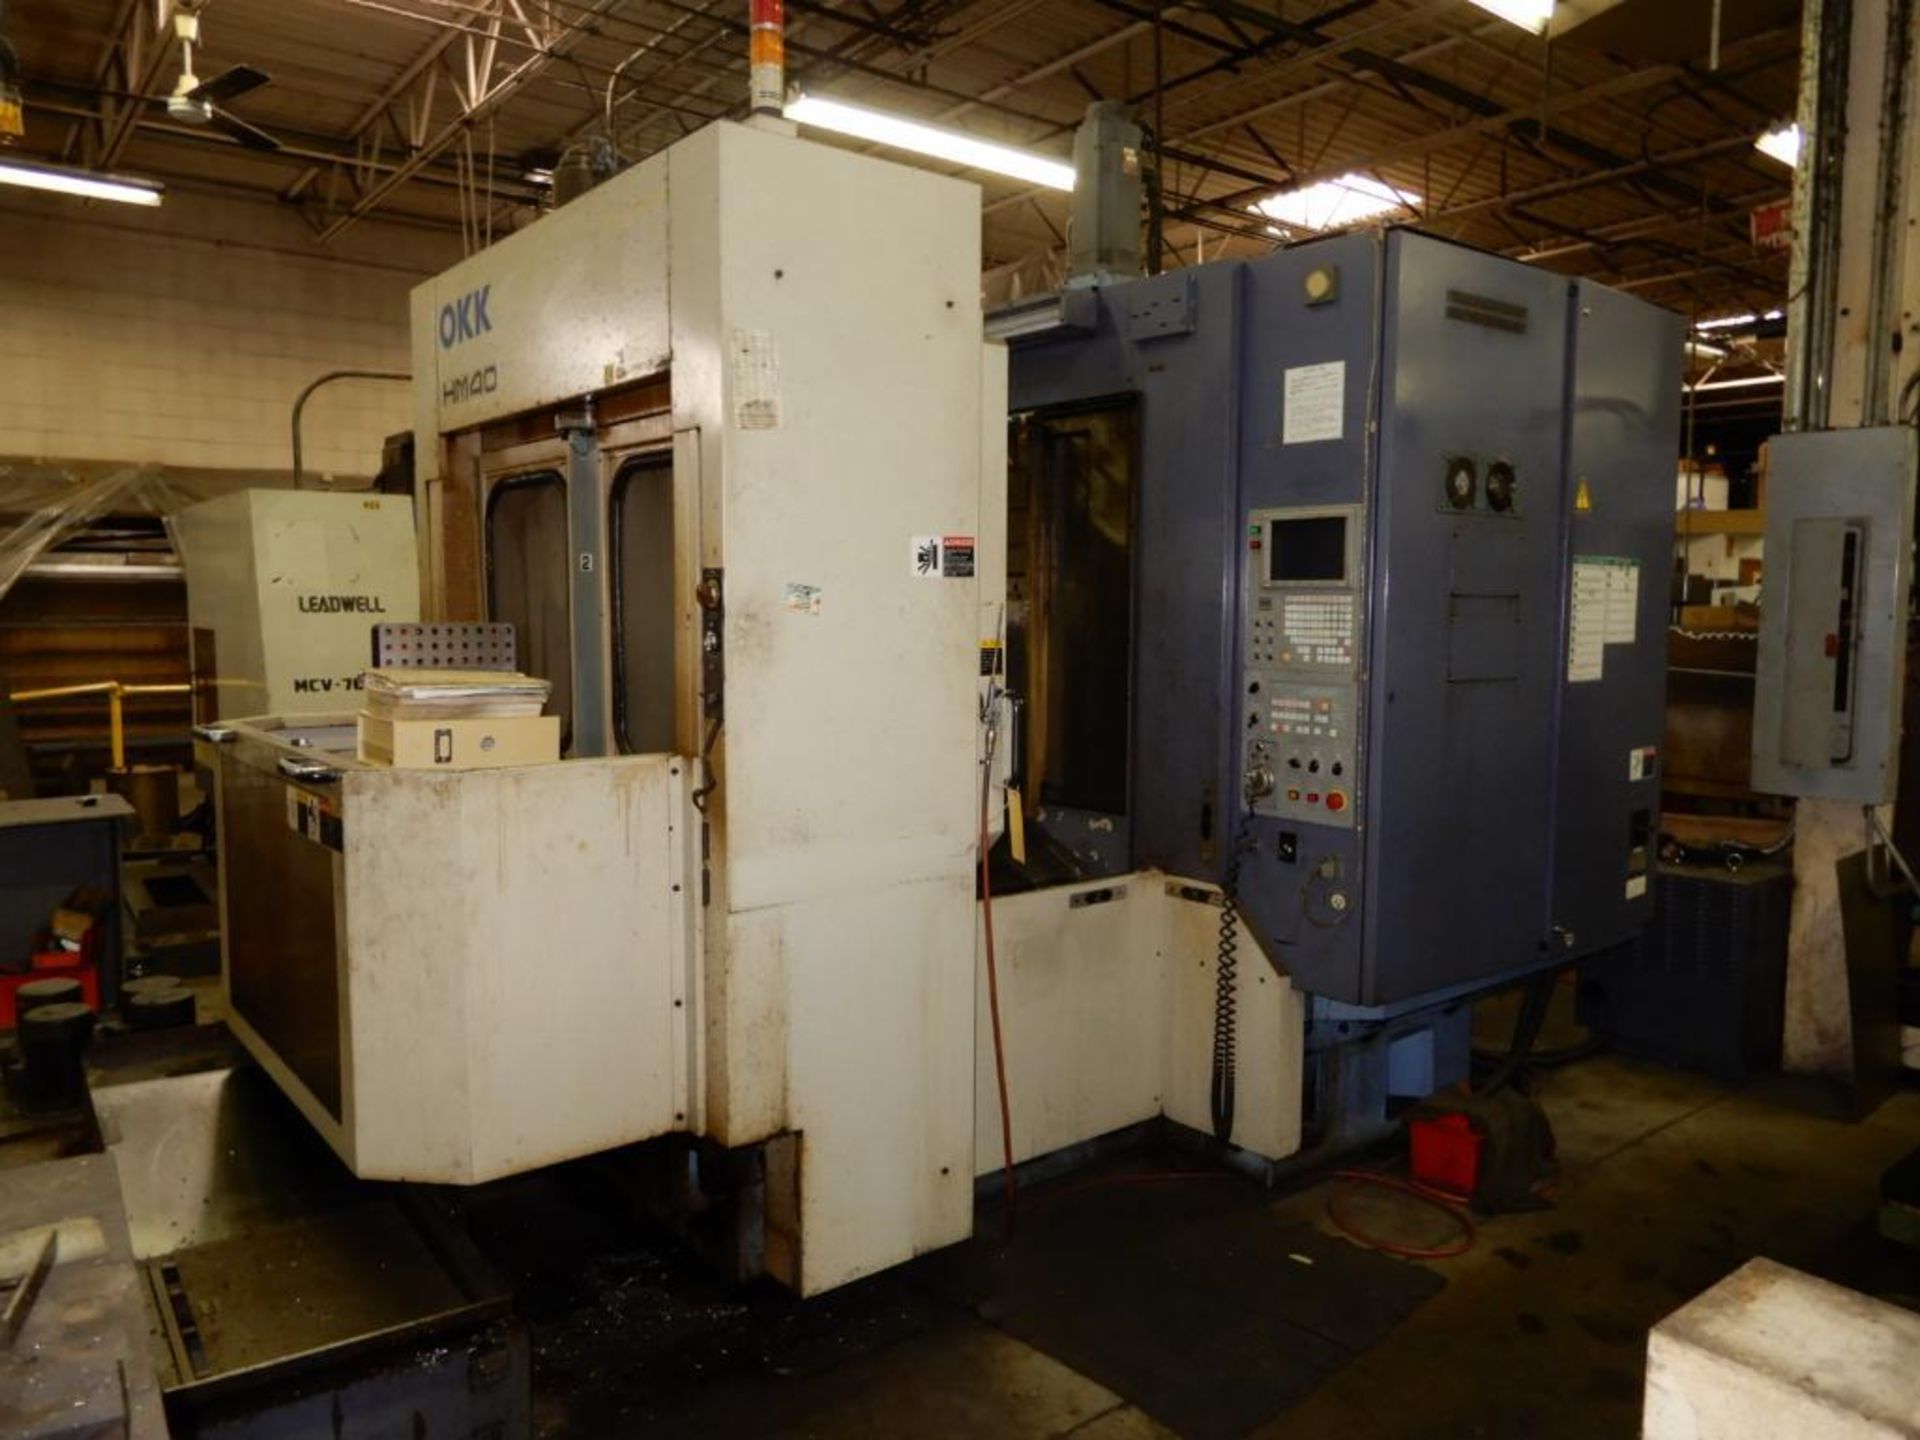 OKK Twin Pallet CNC Horizontal Machining Center Model HM-40 (1998), 15.75 in. x 15.75 in. Pallets, 2 - Image 5 of 5